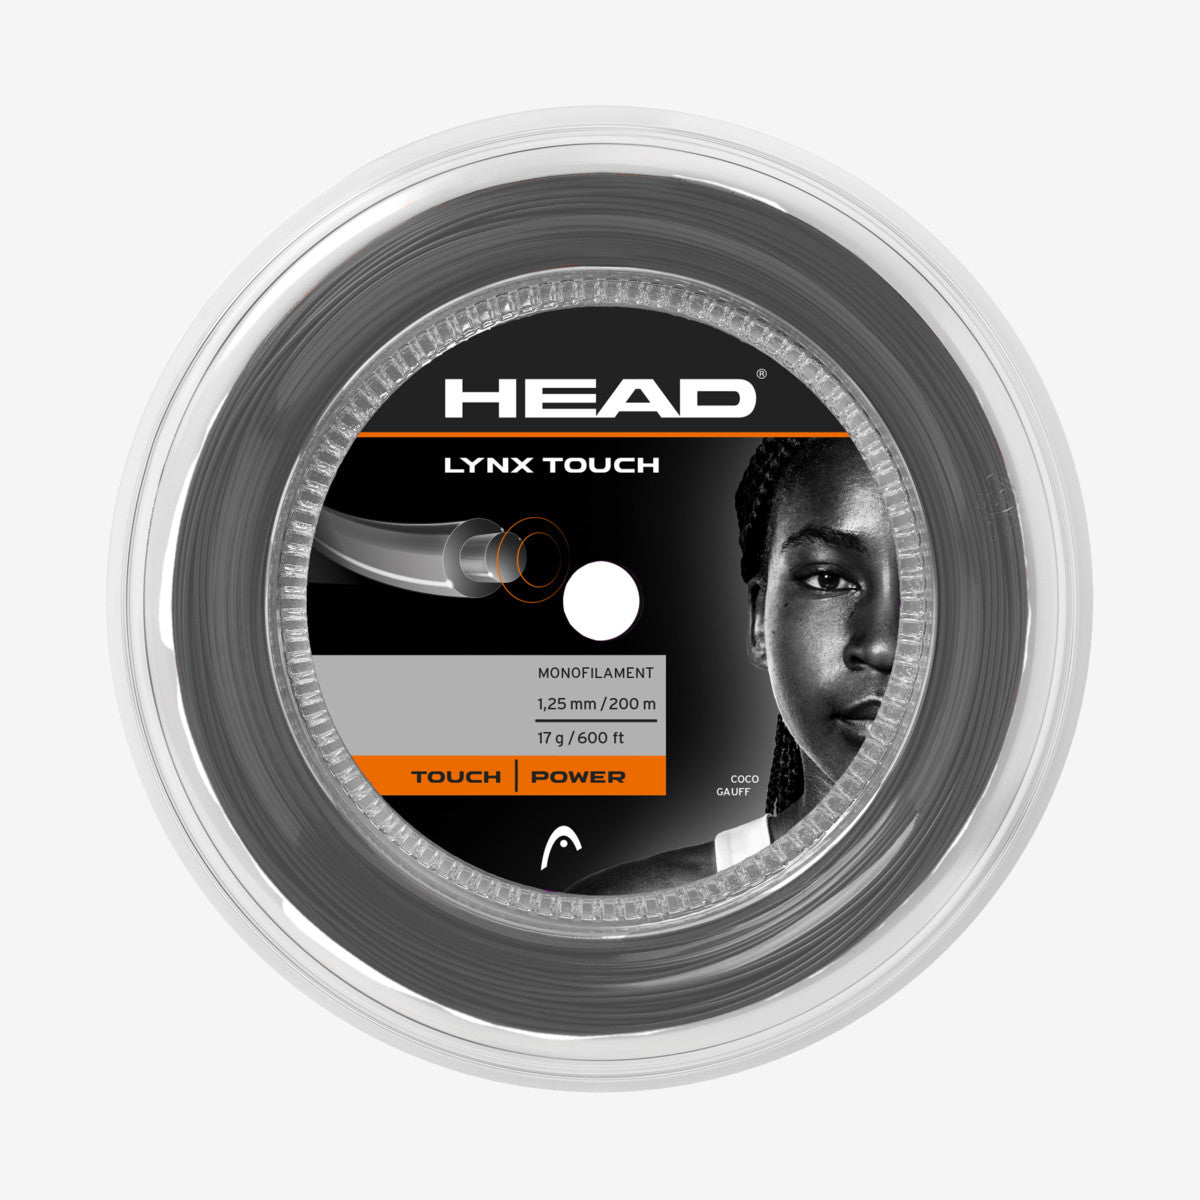 A 200 Metre Reel of Head Lynch Touch Tennis String for sale at GSM Sports